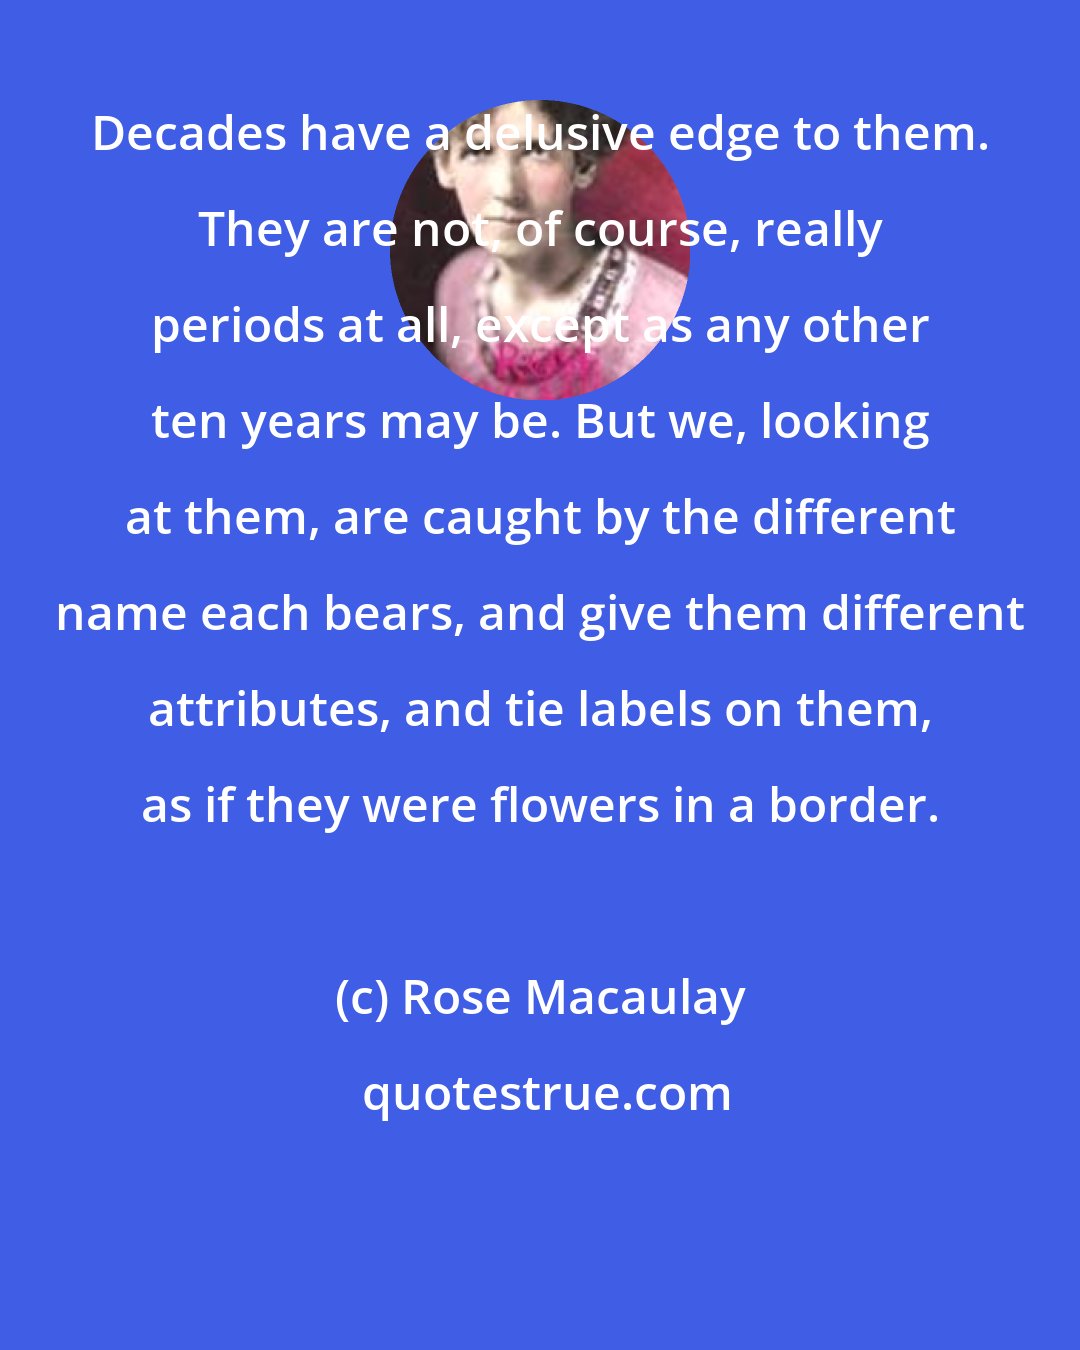 Rose Macaulay: Decades have a delusive edge to them. They are not, of course, really periods at all, except as any other ten years may be. But we, looking at them, are caught by the different name each bears, and give them different attributes, and tie labels on them, as if they were flowers in a border.